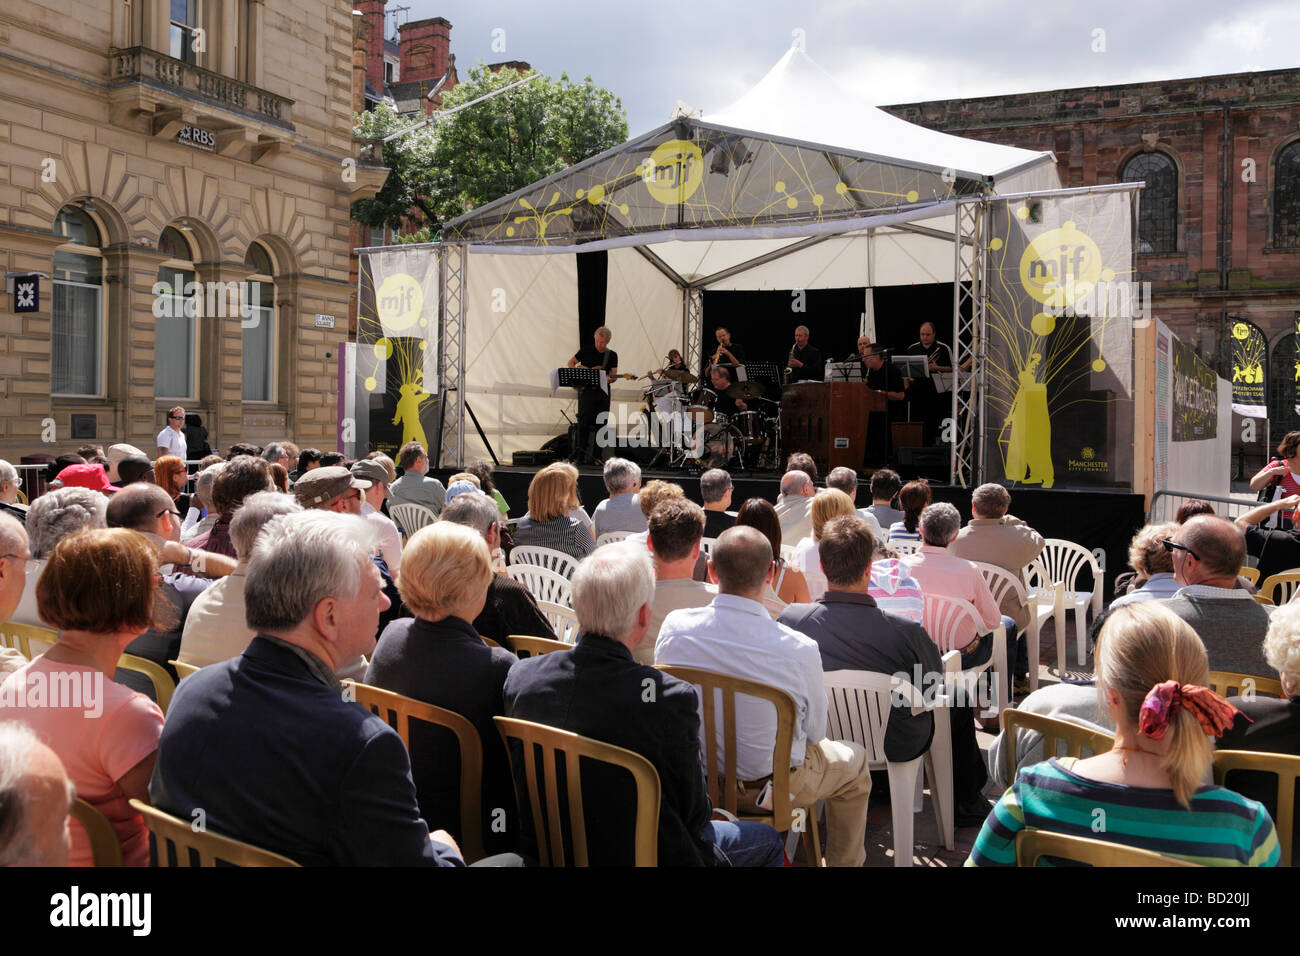 crowds watching a band at the manchester jazz festival in st annes square manchester uk Stock Photo